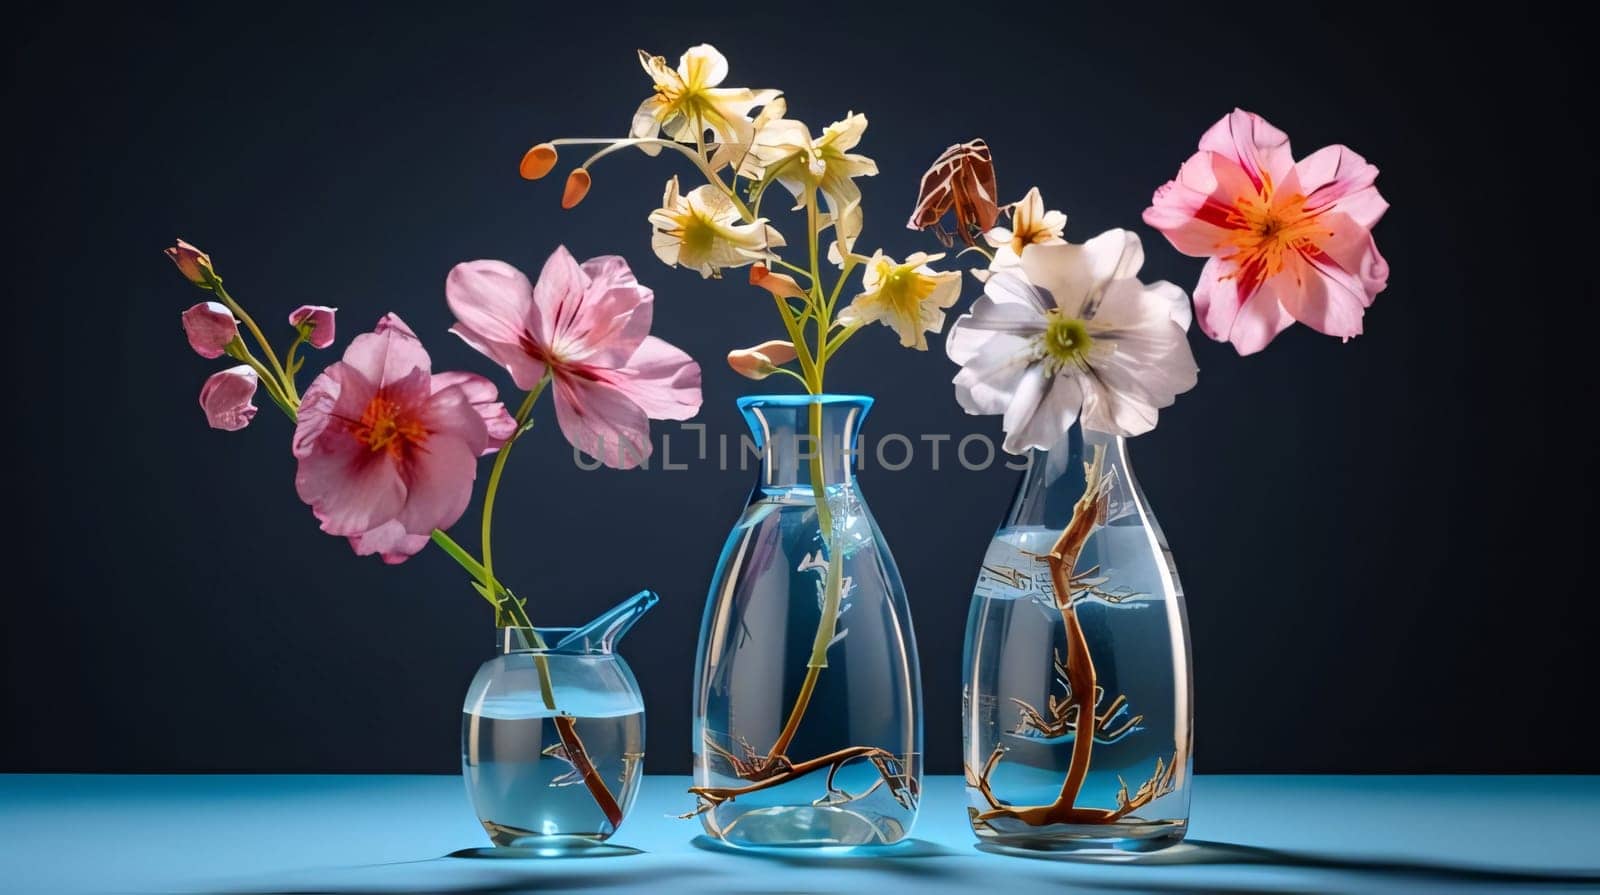 Single colorful flowers in transparent vases on dark. Flowering flowers, a symbol of spring, new life. A joyful time of nature waking up to life.